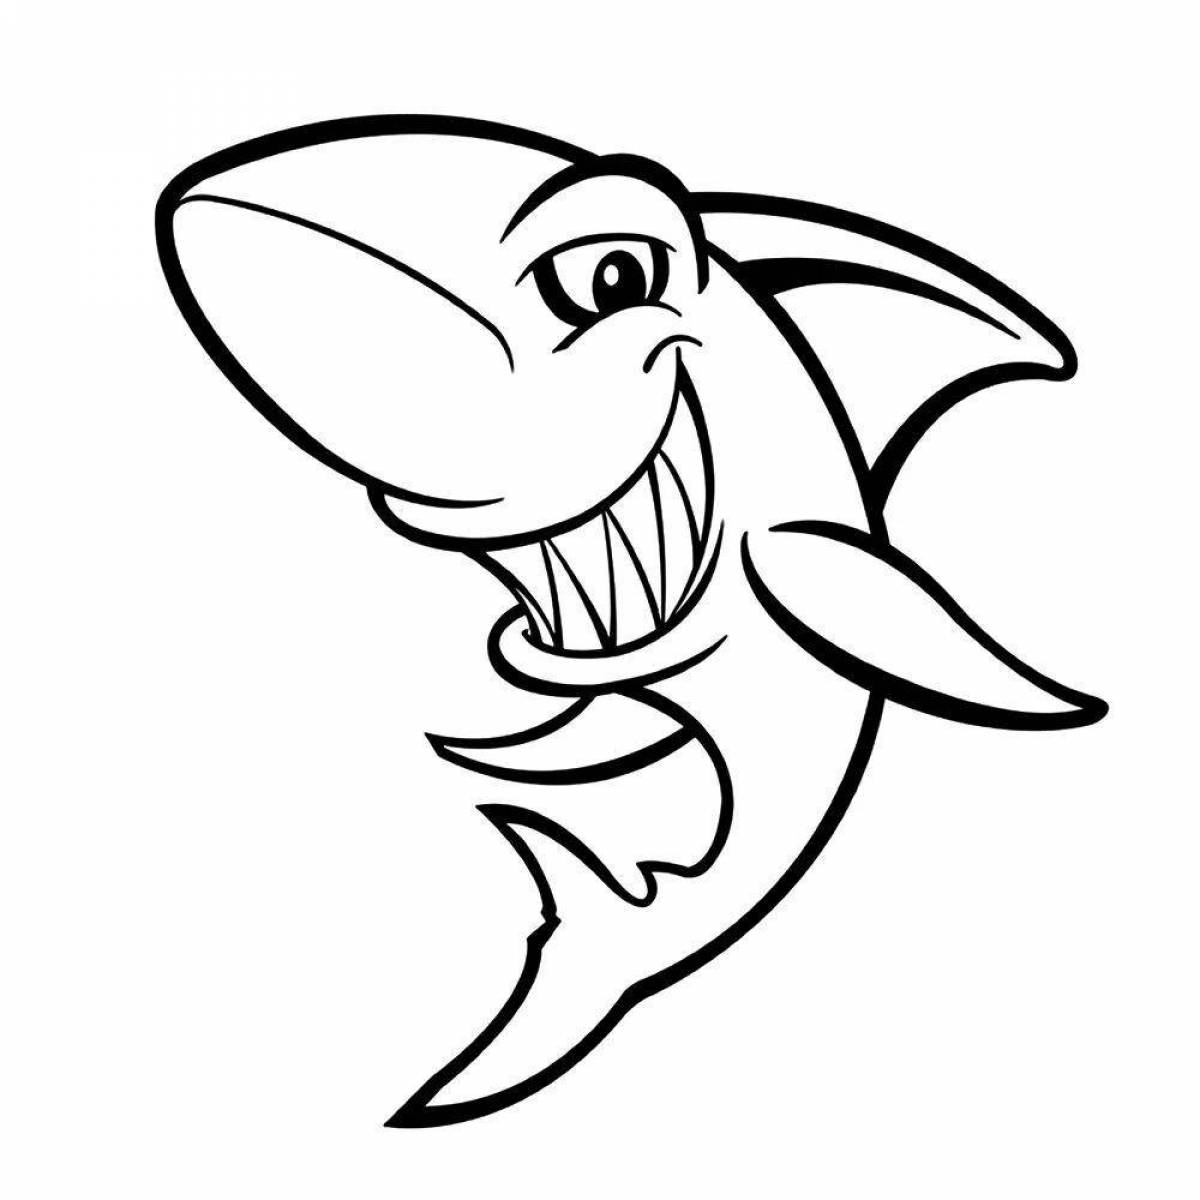 Coloring book gorgeous angry shark